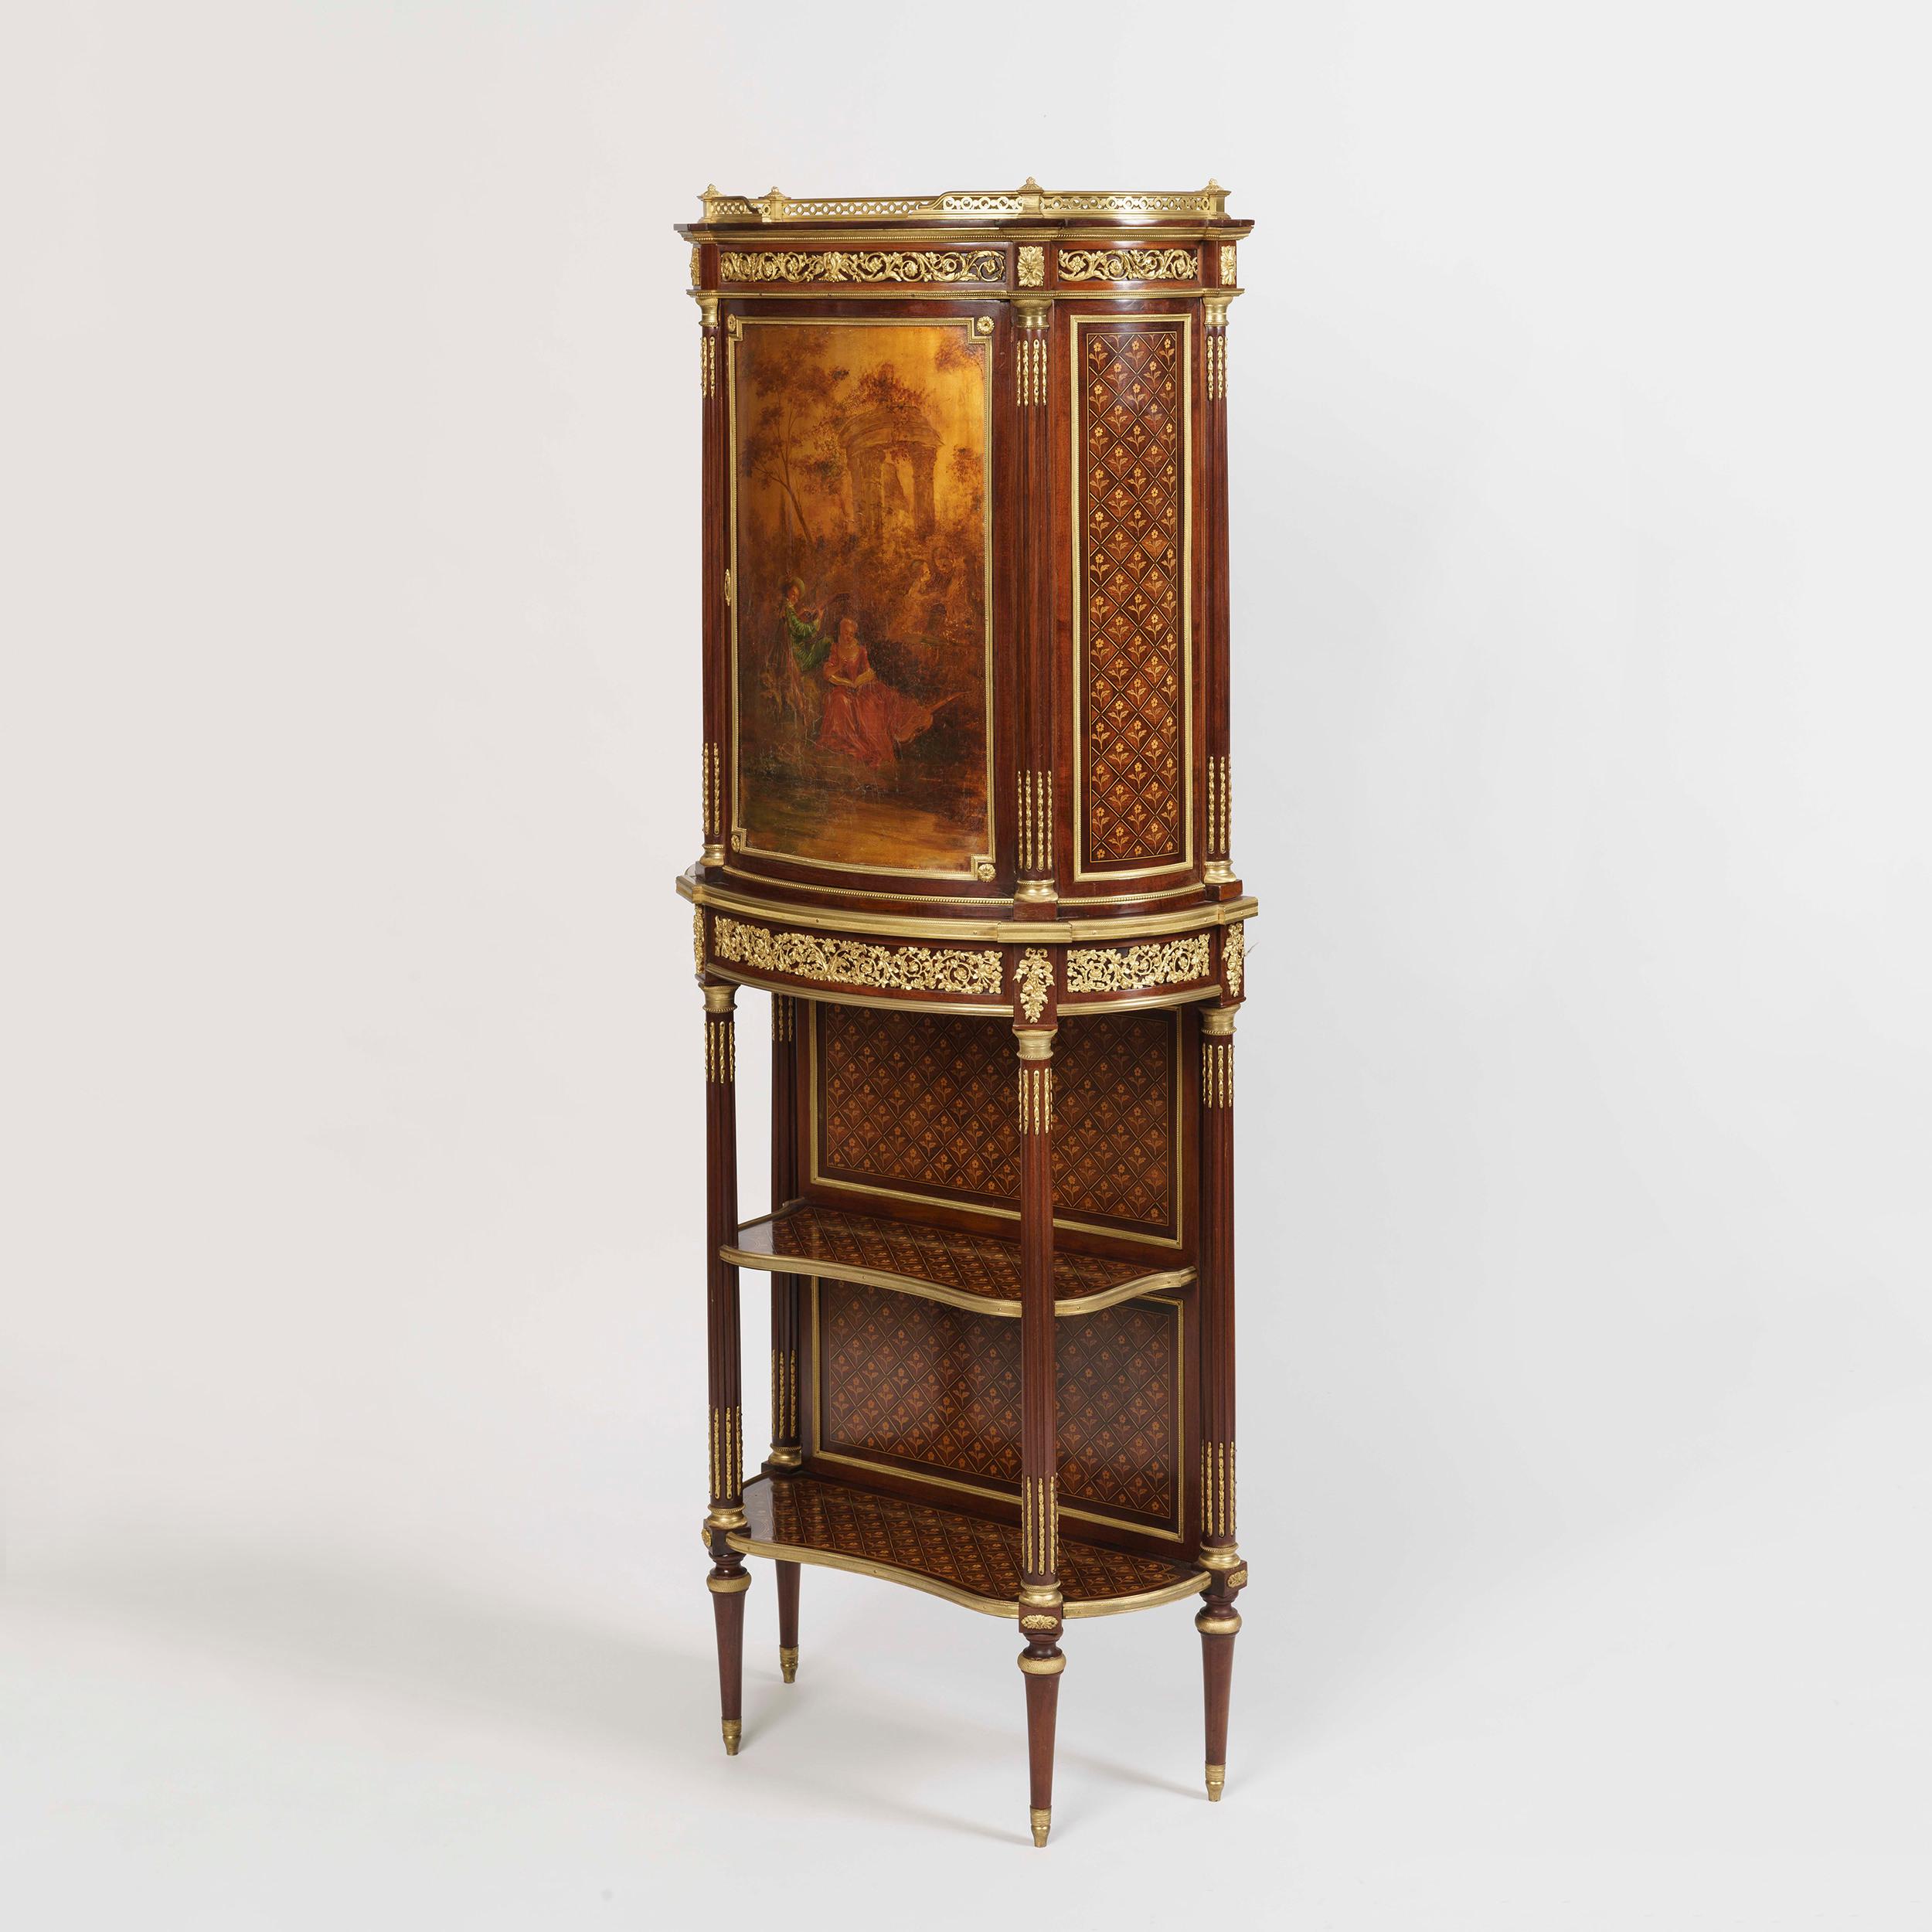 A Harlequin Pair of Napoleon III Meubles d'Entre-Deux
 
Of serpentine demilune form, constructed employing mahogany, with extensive use of marquetry foliates, and gold ground upper door panels, painted in the Vernis Martin manner depicting fête